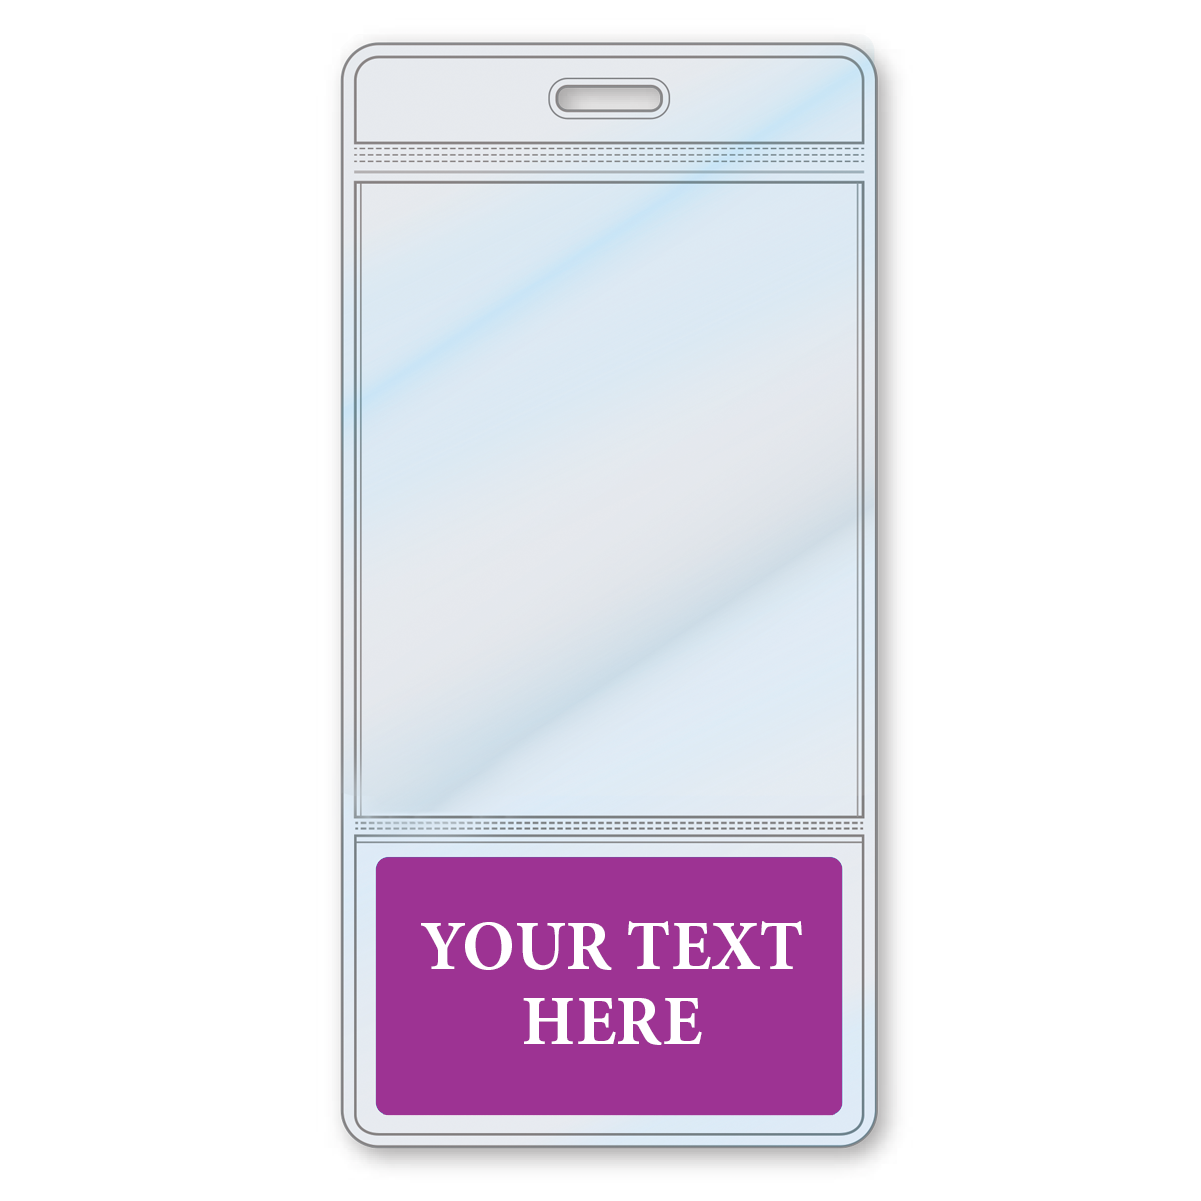 A customizable Custom Printed BadgeBottoms® Vertical (Badge Holder & Badge Buddy IN ONE!!) featuring a blank ID badge with space for a photo and text. The bottom section has a purple background with "YOUR TEXT HERE" written in white, making it perfect for personalizing your role.